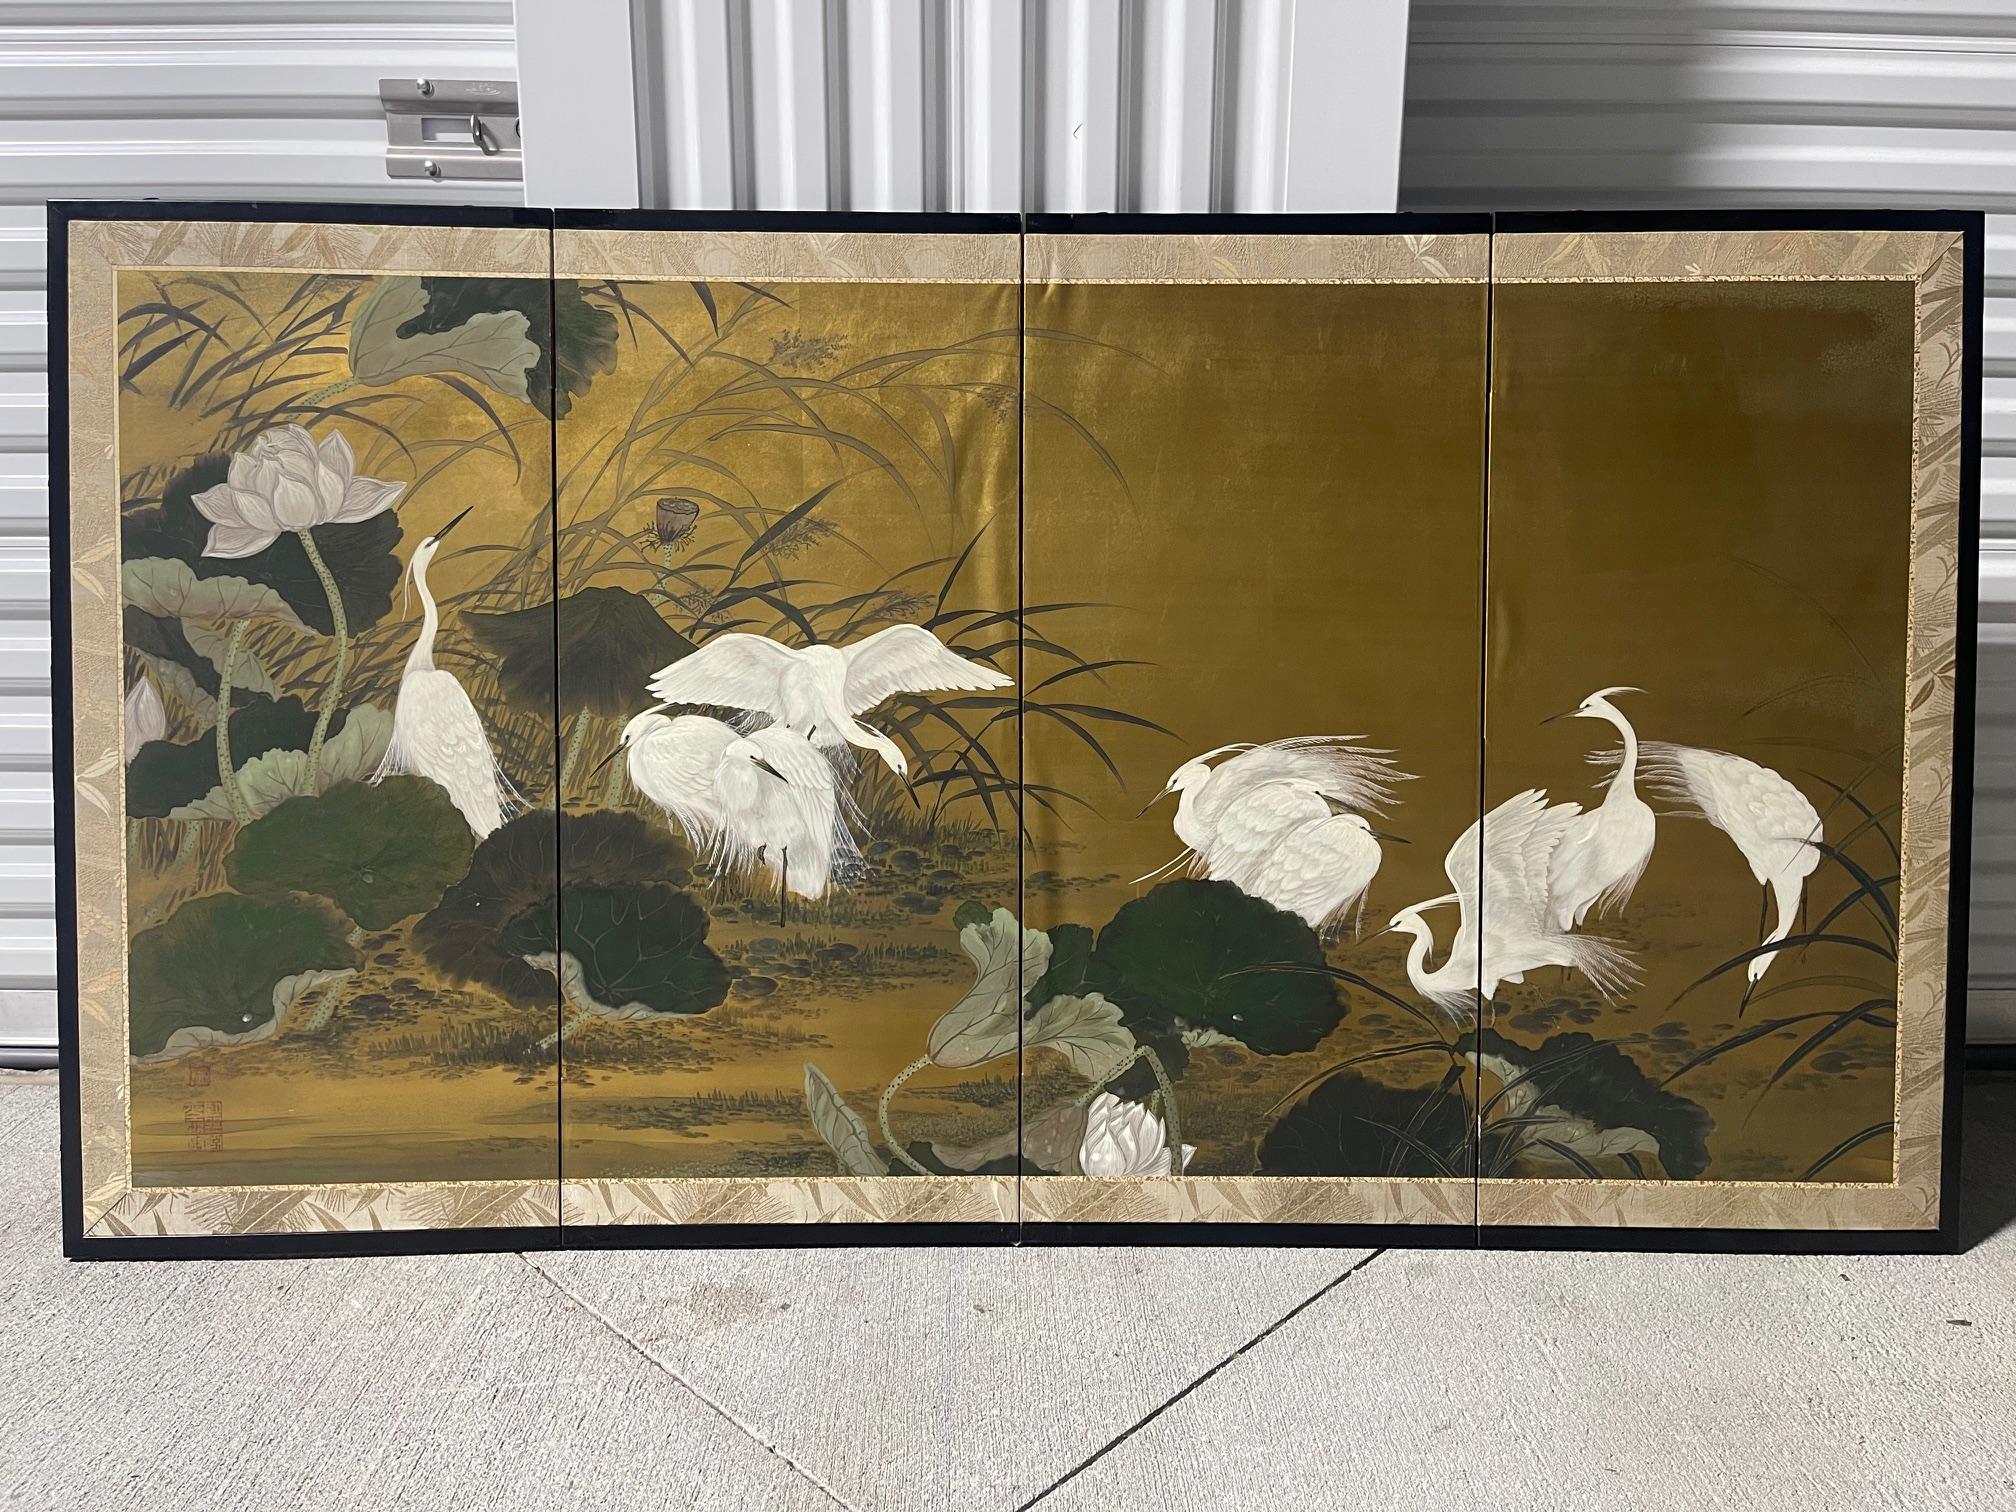 Four-panel Japanese Byobu folding screen depicting a scene of Egrets resting in a forest.  The dark, rich colors, gold leaf, and beautiful hand-painted detail really make this an attractive and special work.  Each panel is 16.75